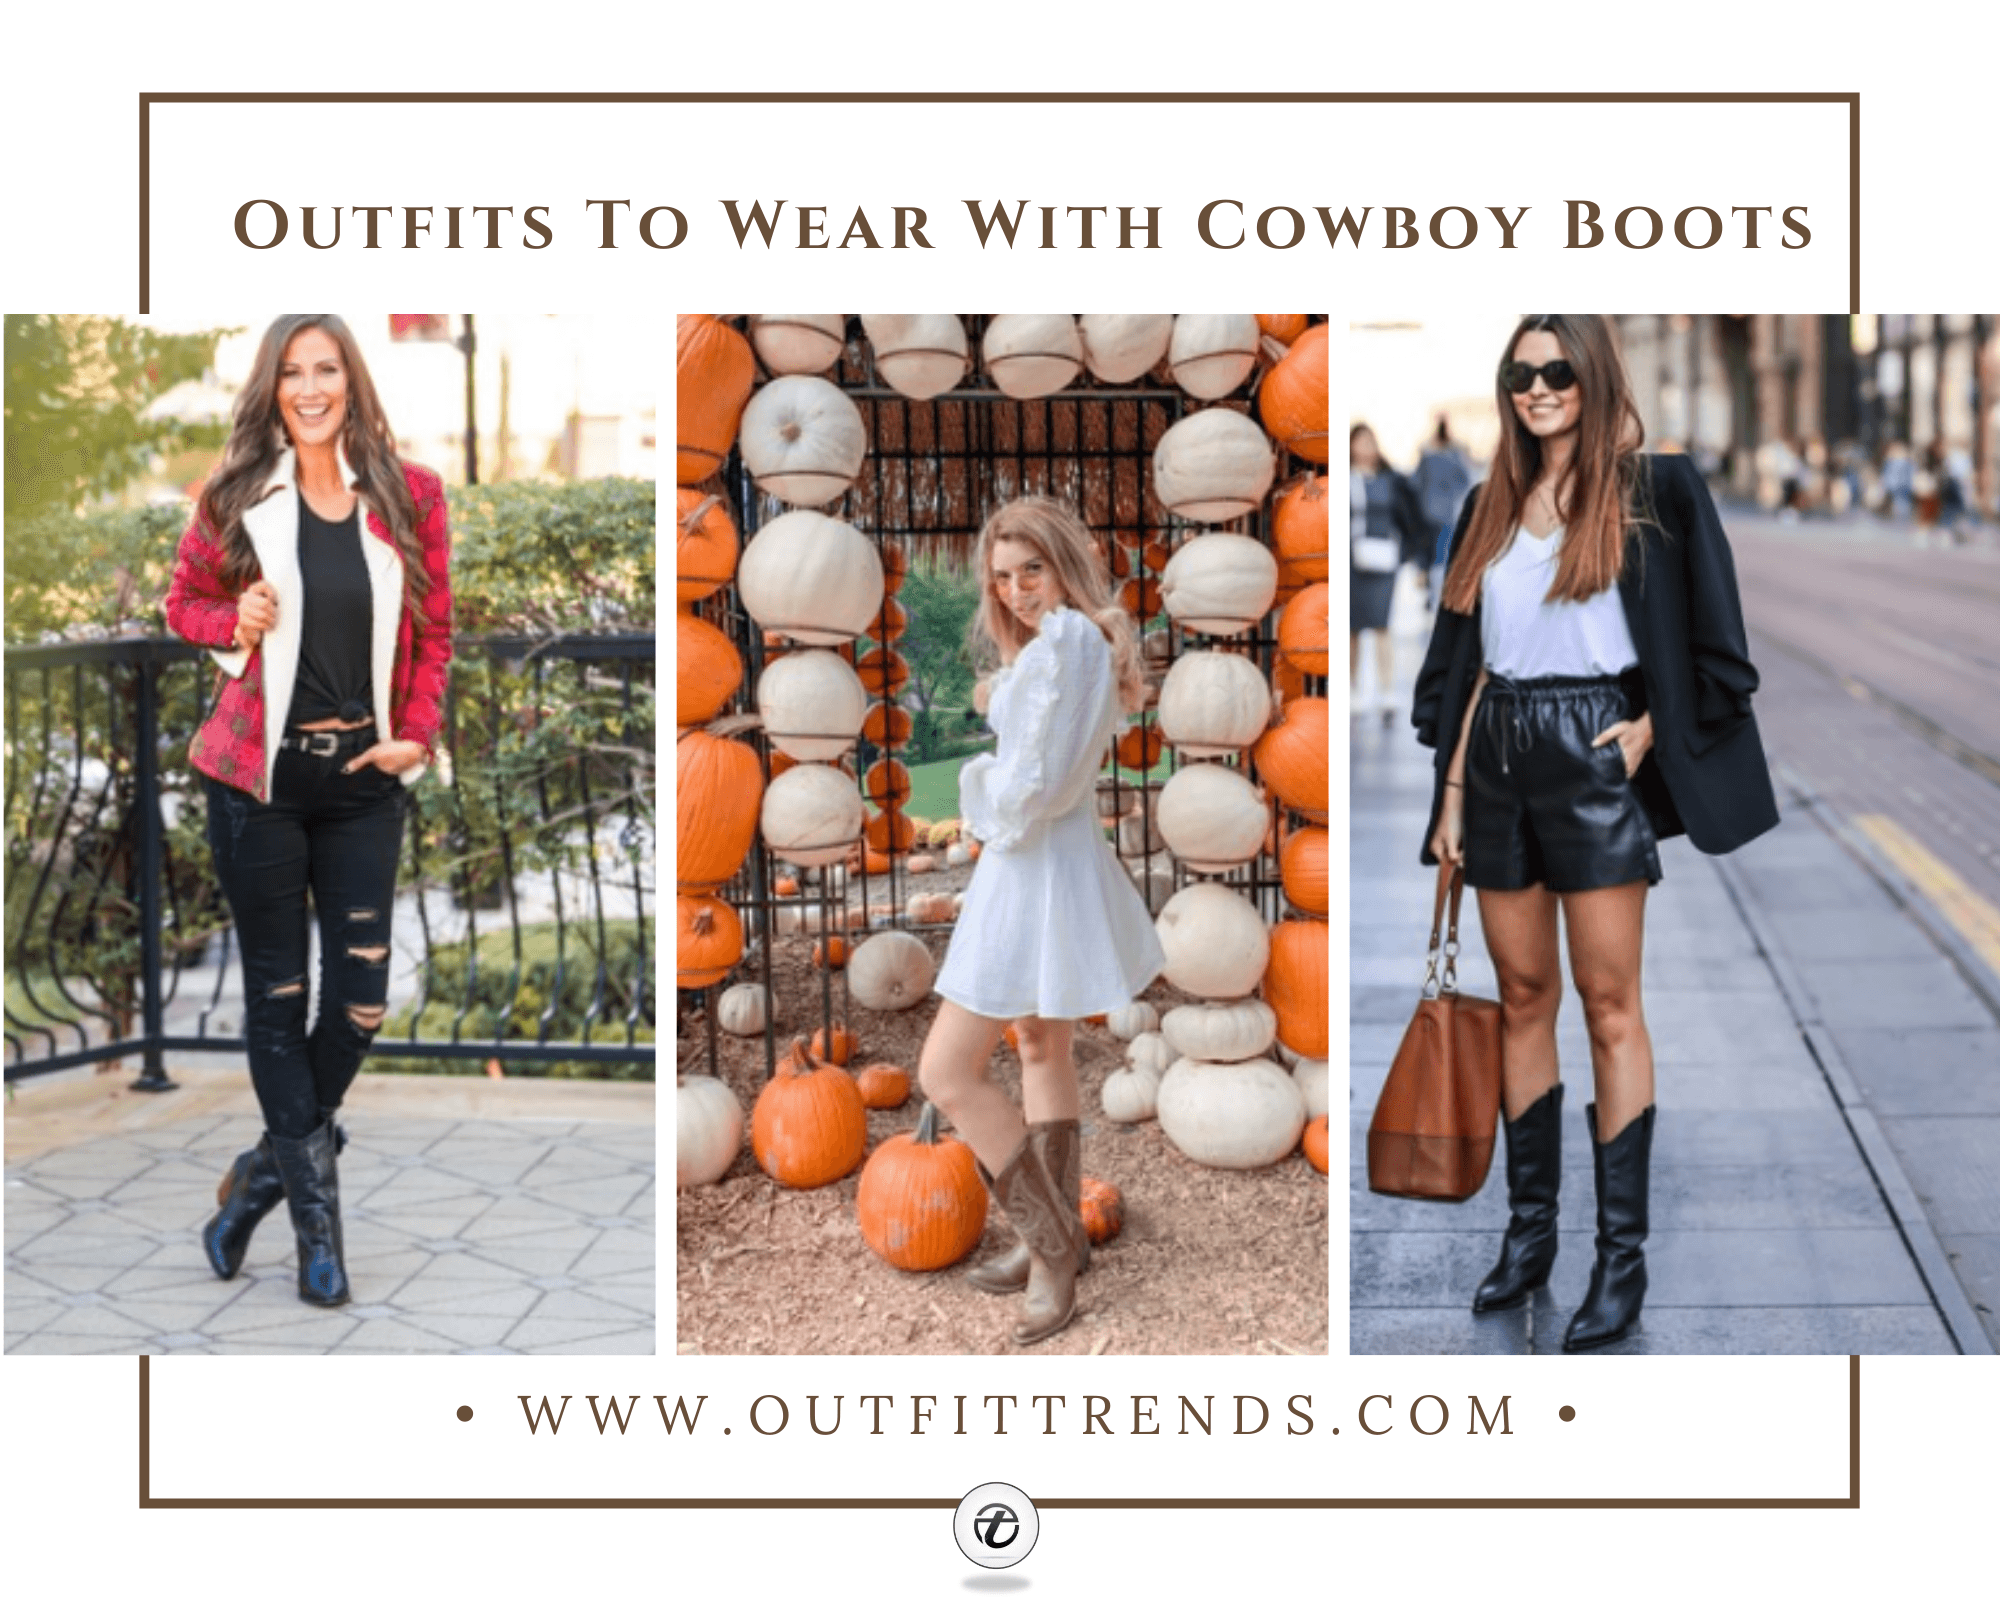 Outfits with Cowboy Boots – 19 Ways to Wear Cowboy Shoes